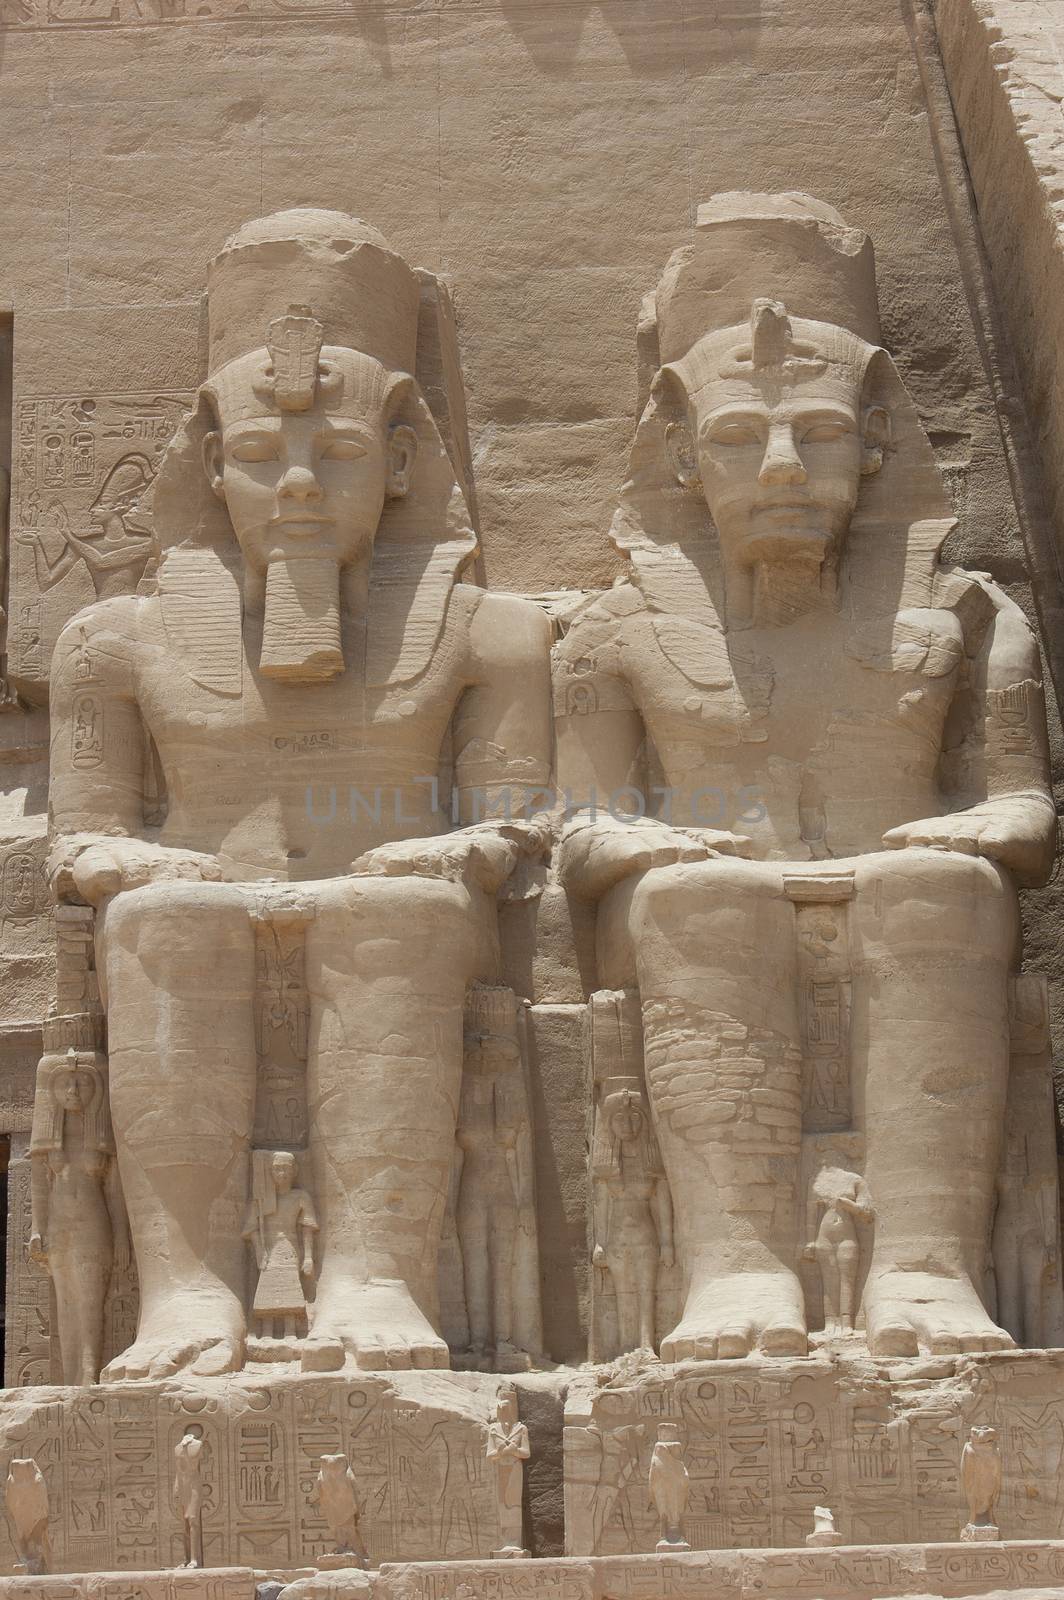 Colossal statue of Ramses II at the entrance to Abu Simbel Temple in Egypt